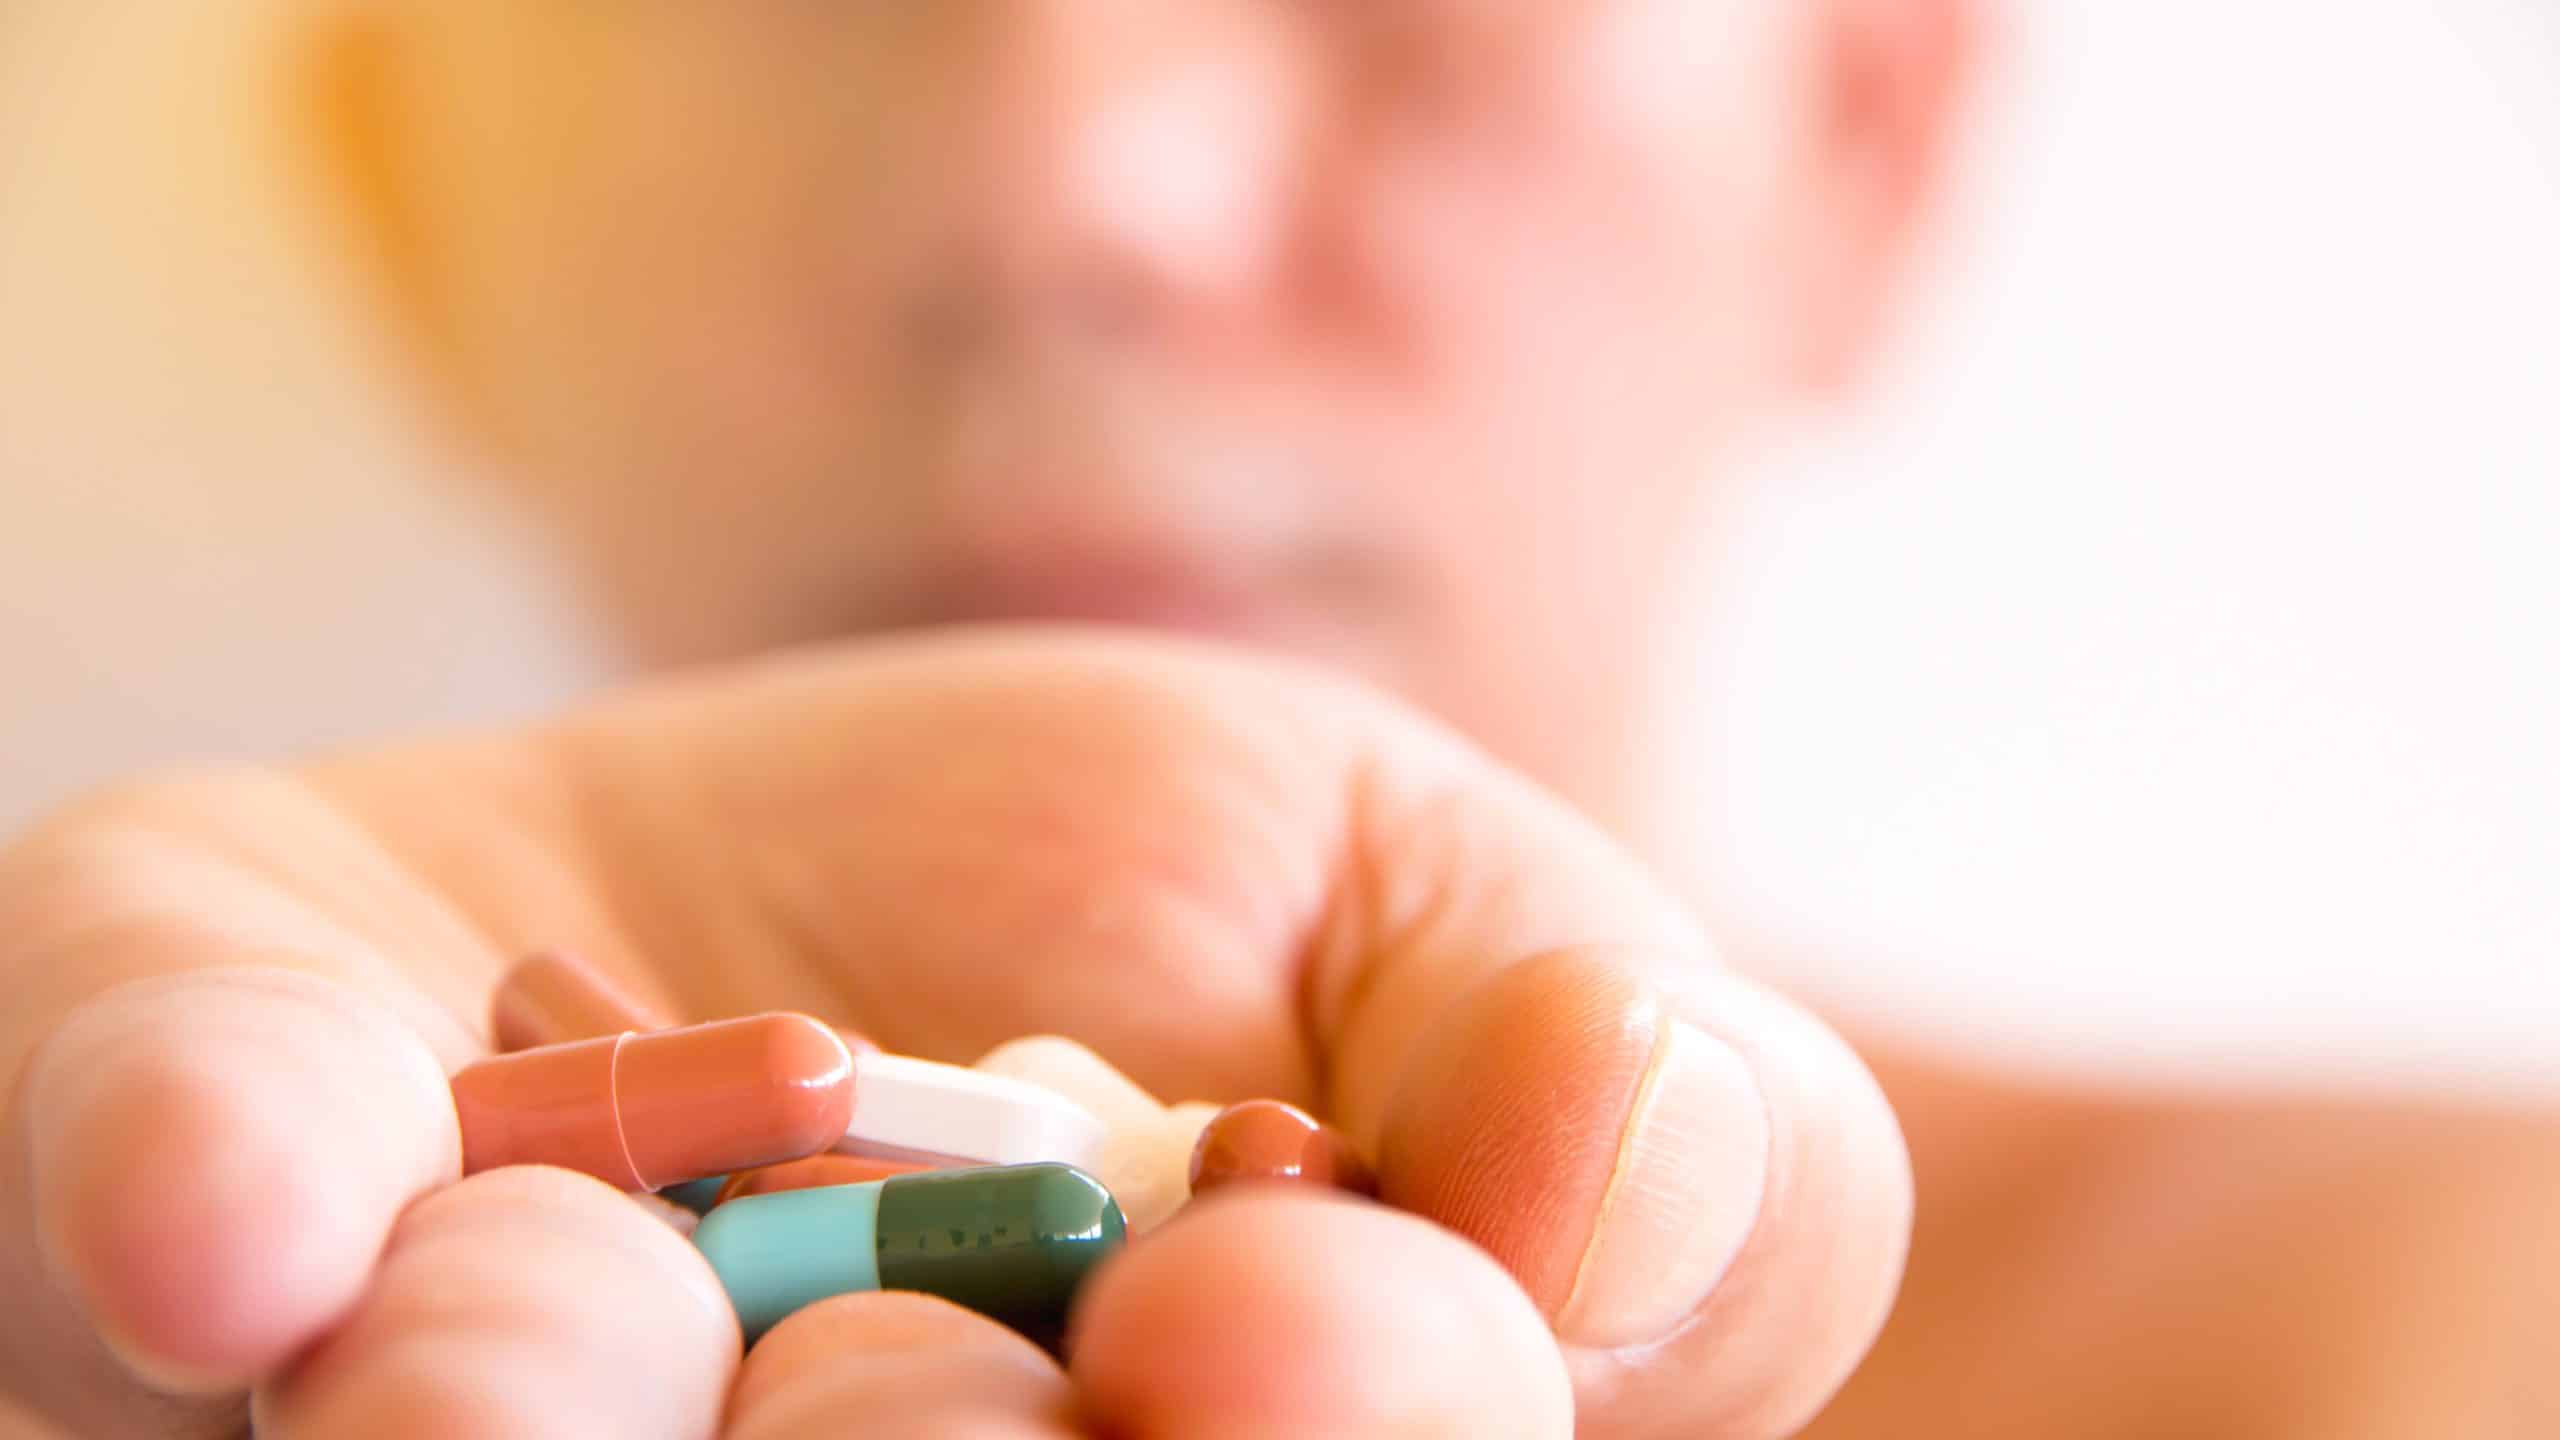 What are the signs of prescription pain pill abuse?